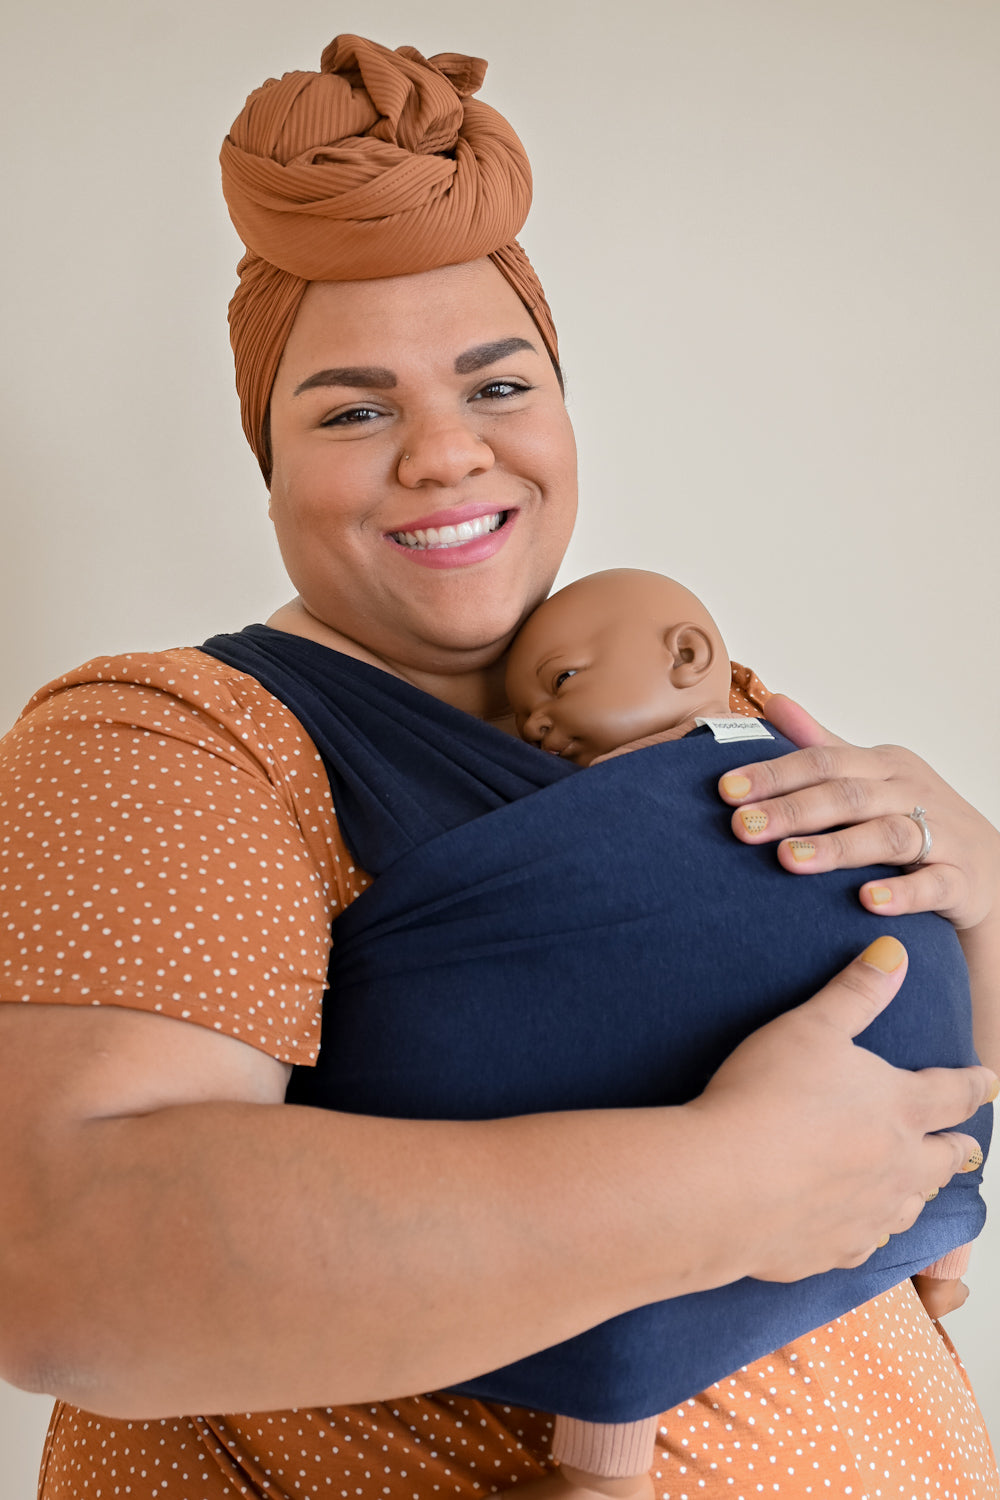 plus-sized parent wearing baby in stretchy wrap